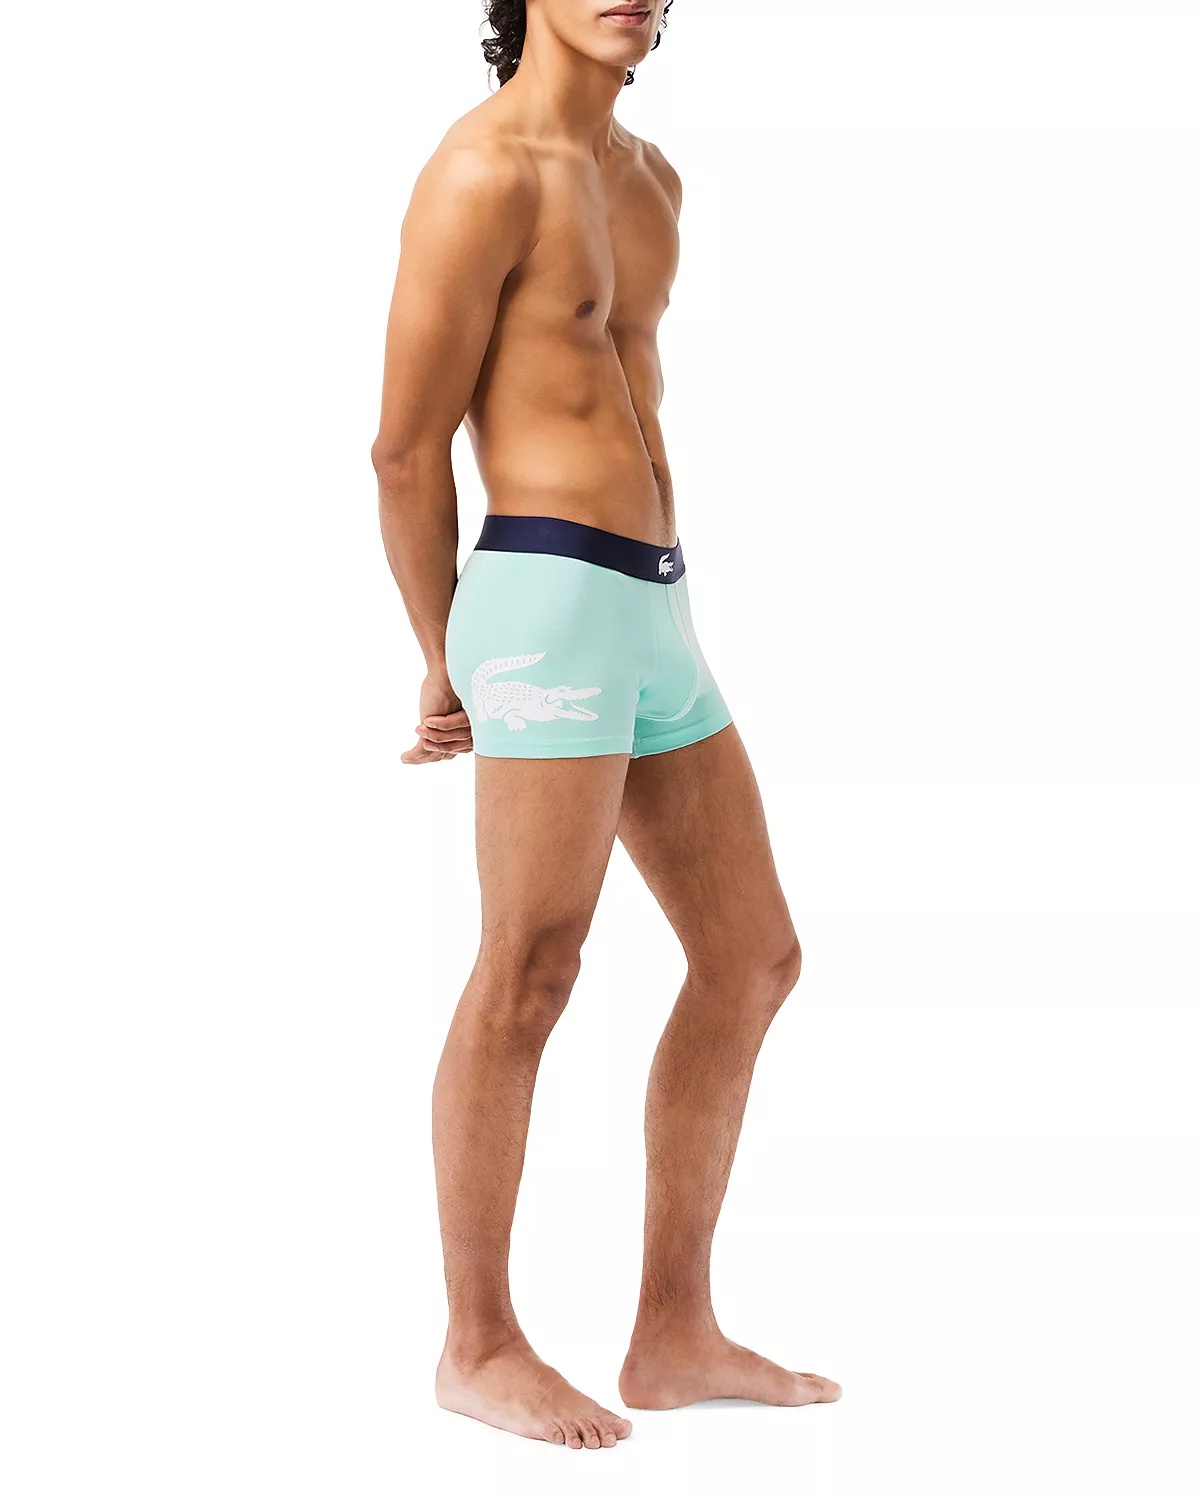 Cotton Stretch Trunks, Pack of 3 - 4